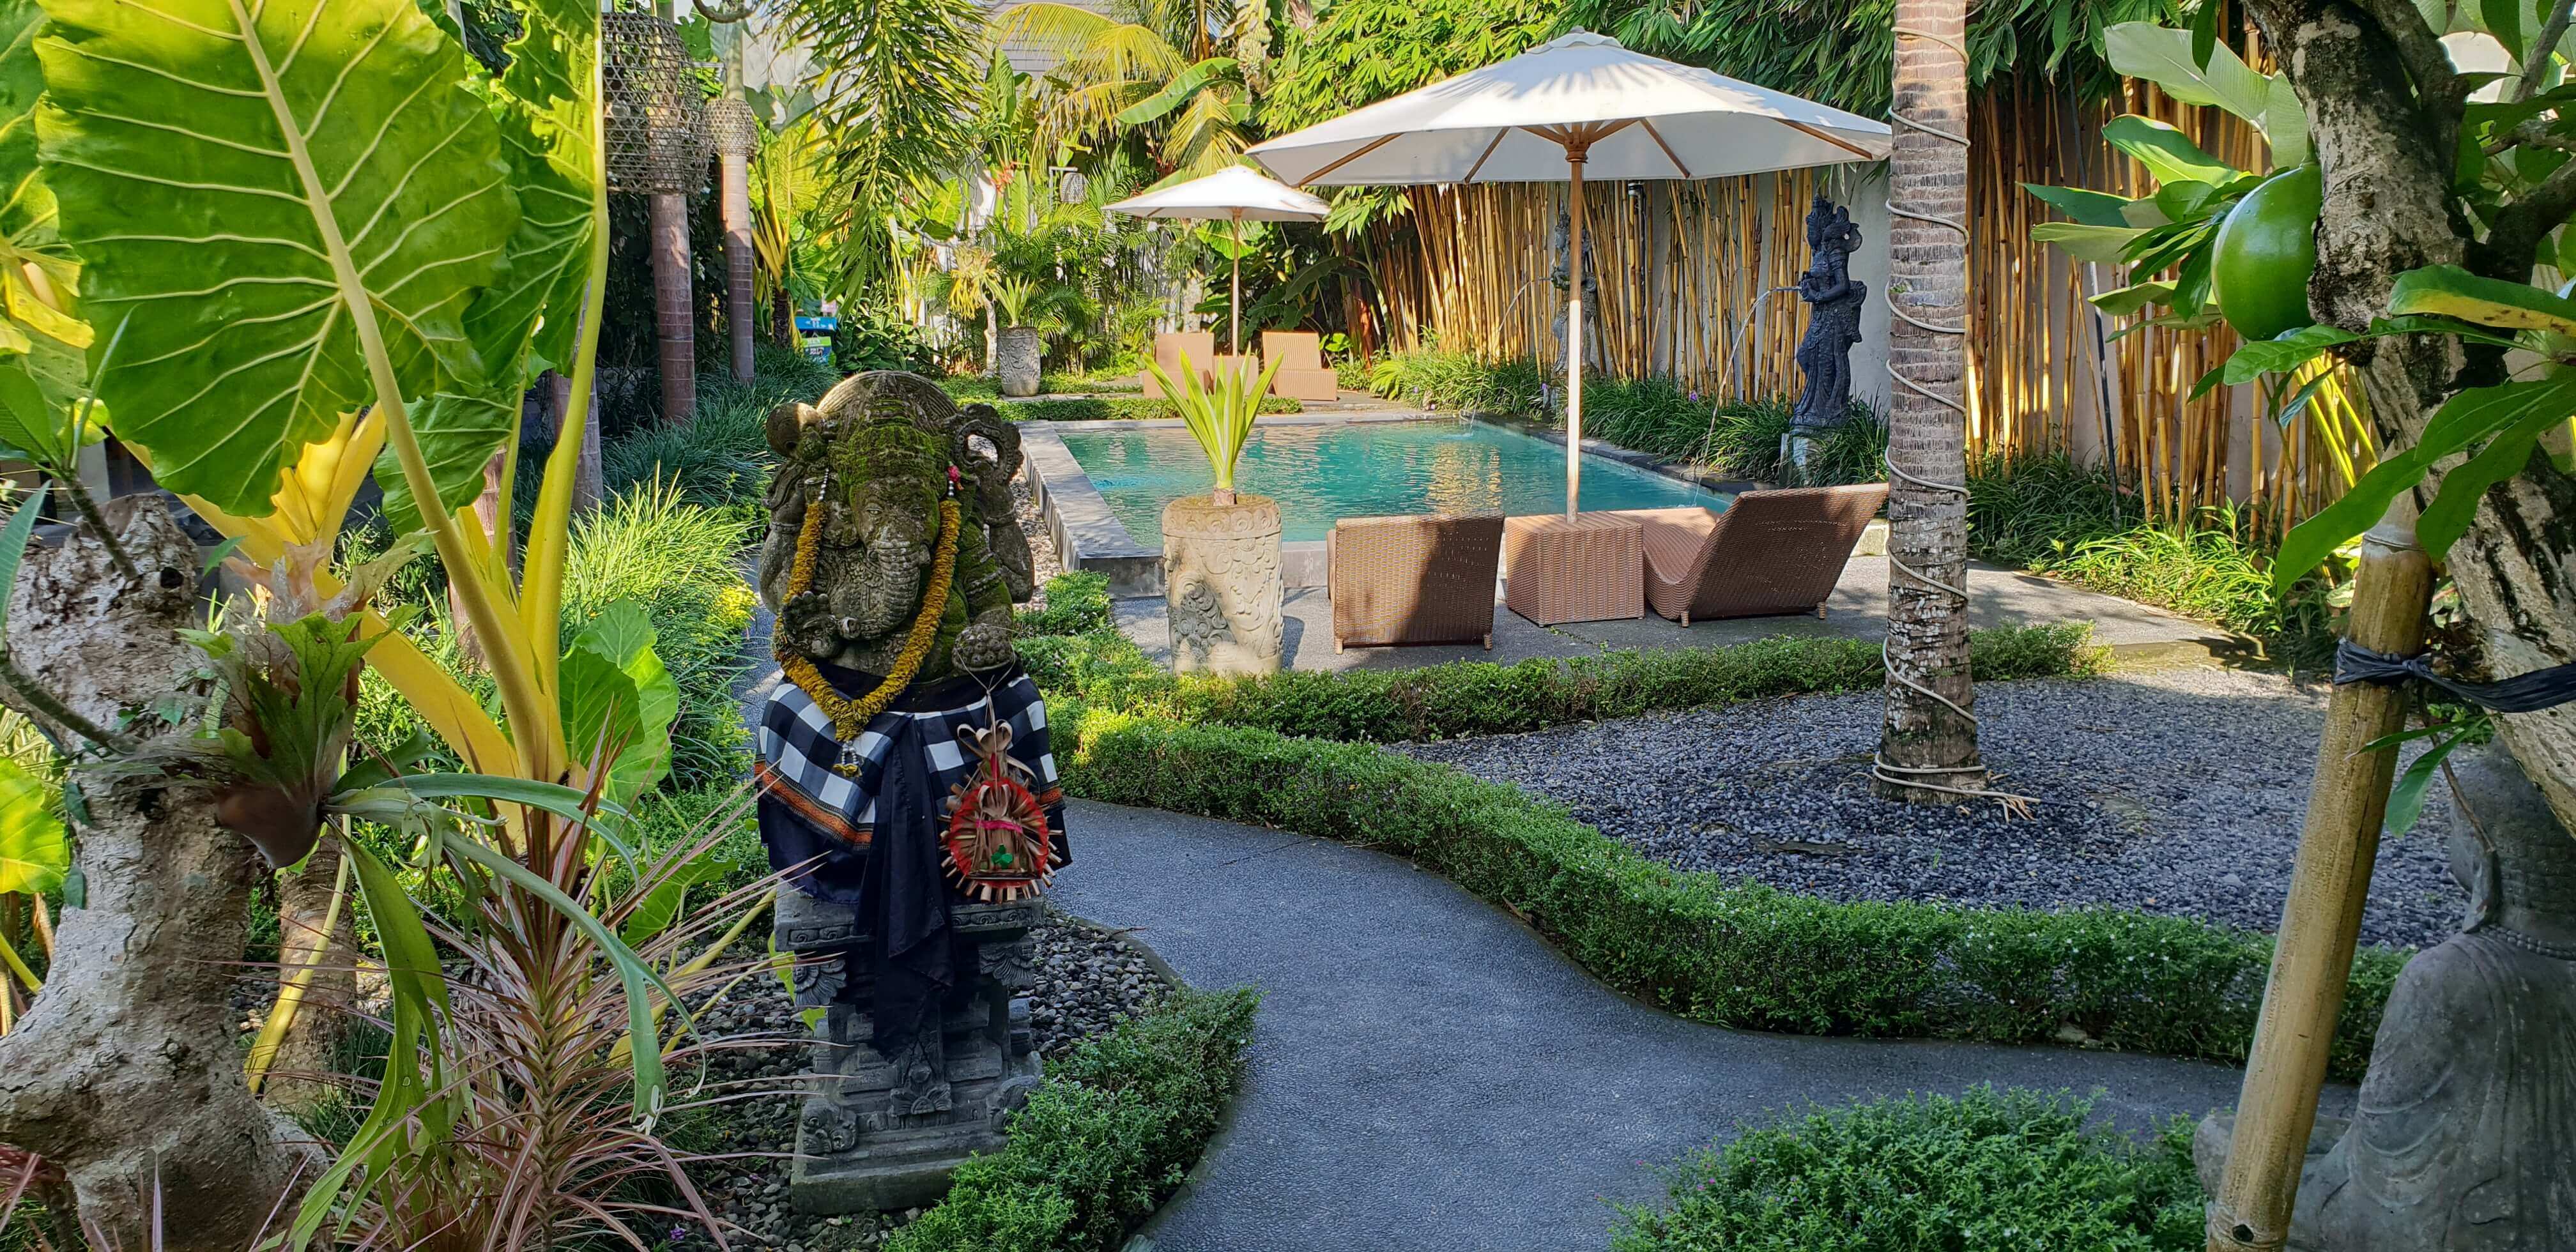 Set amidst the rice fields, the Moksha in Ubud offers a serene green ambience besides a tropical pool